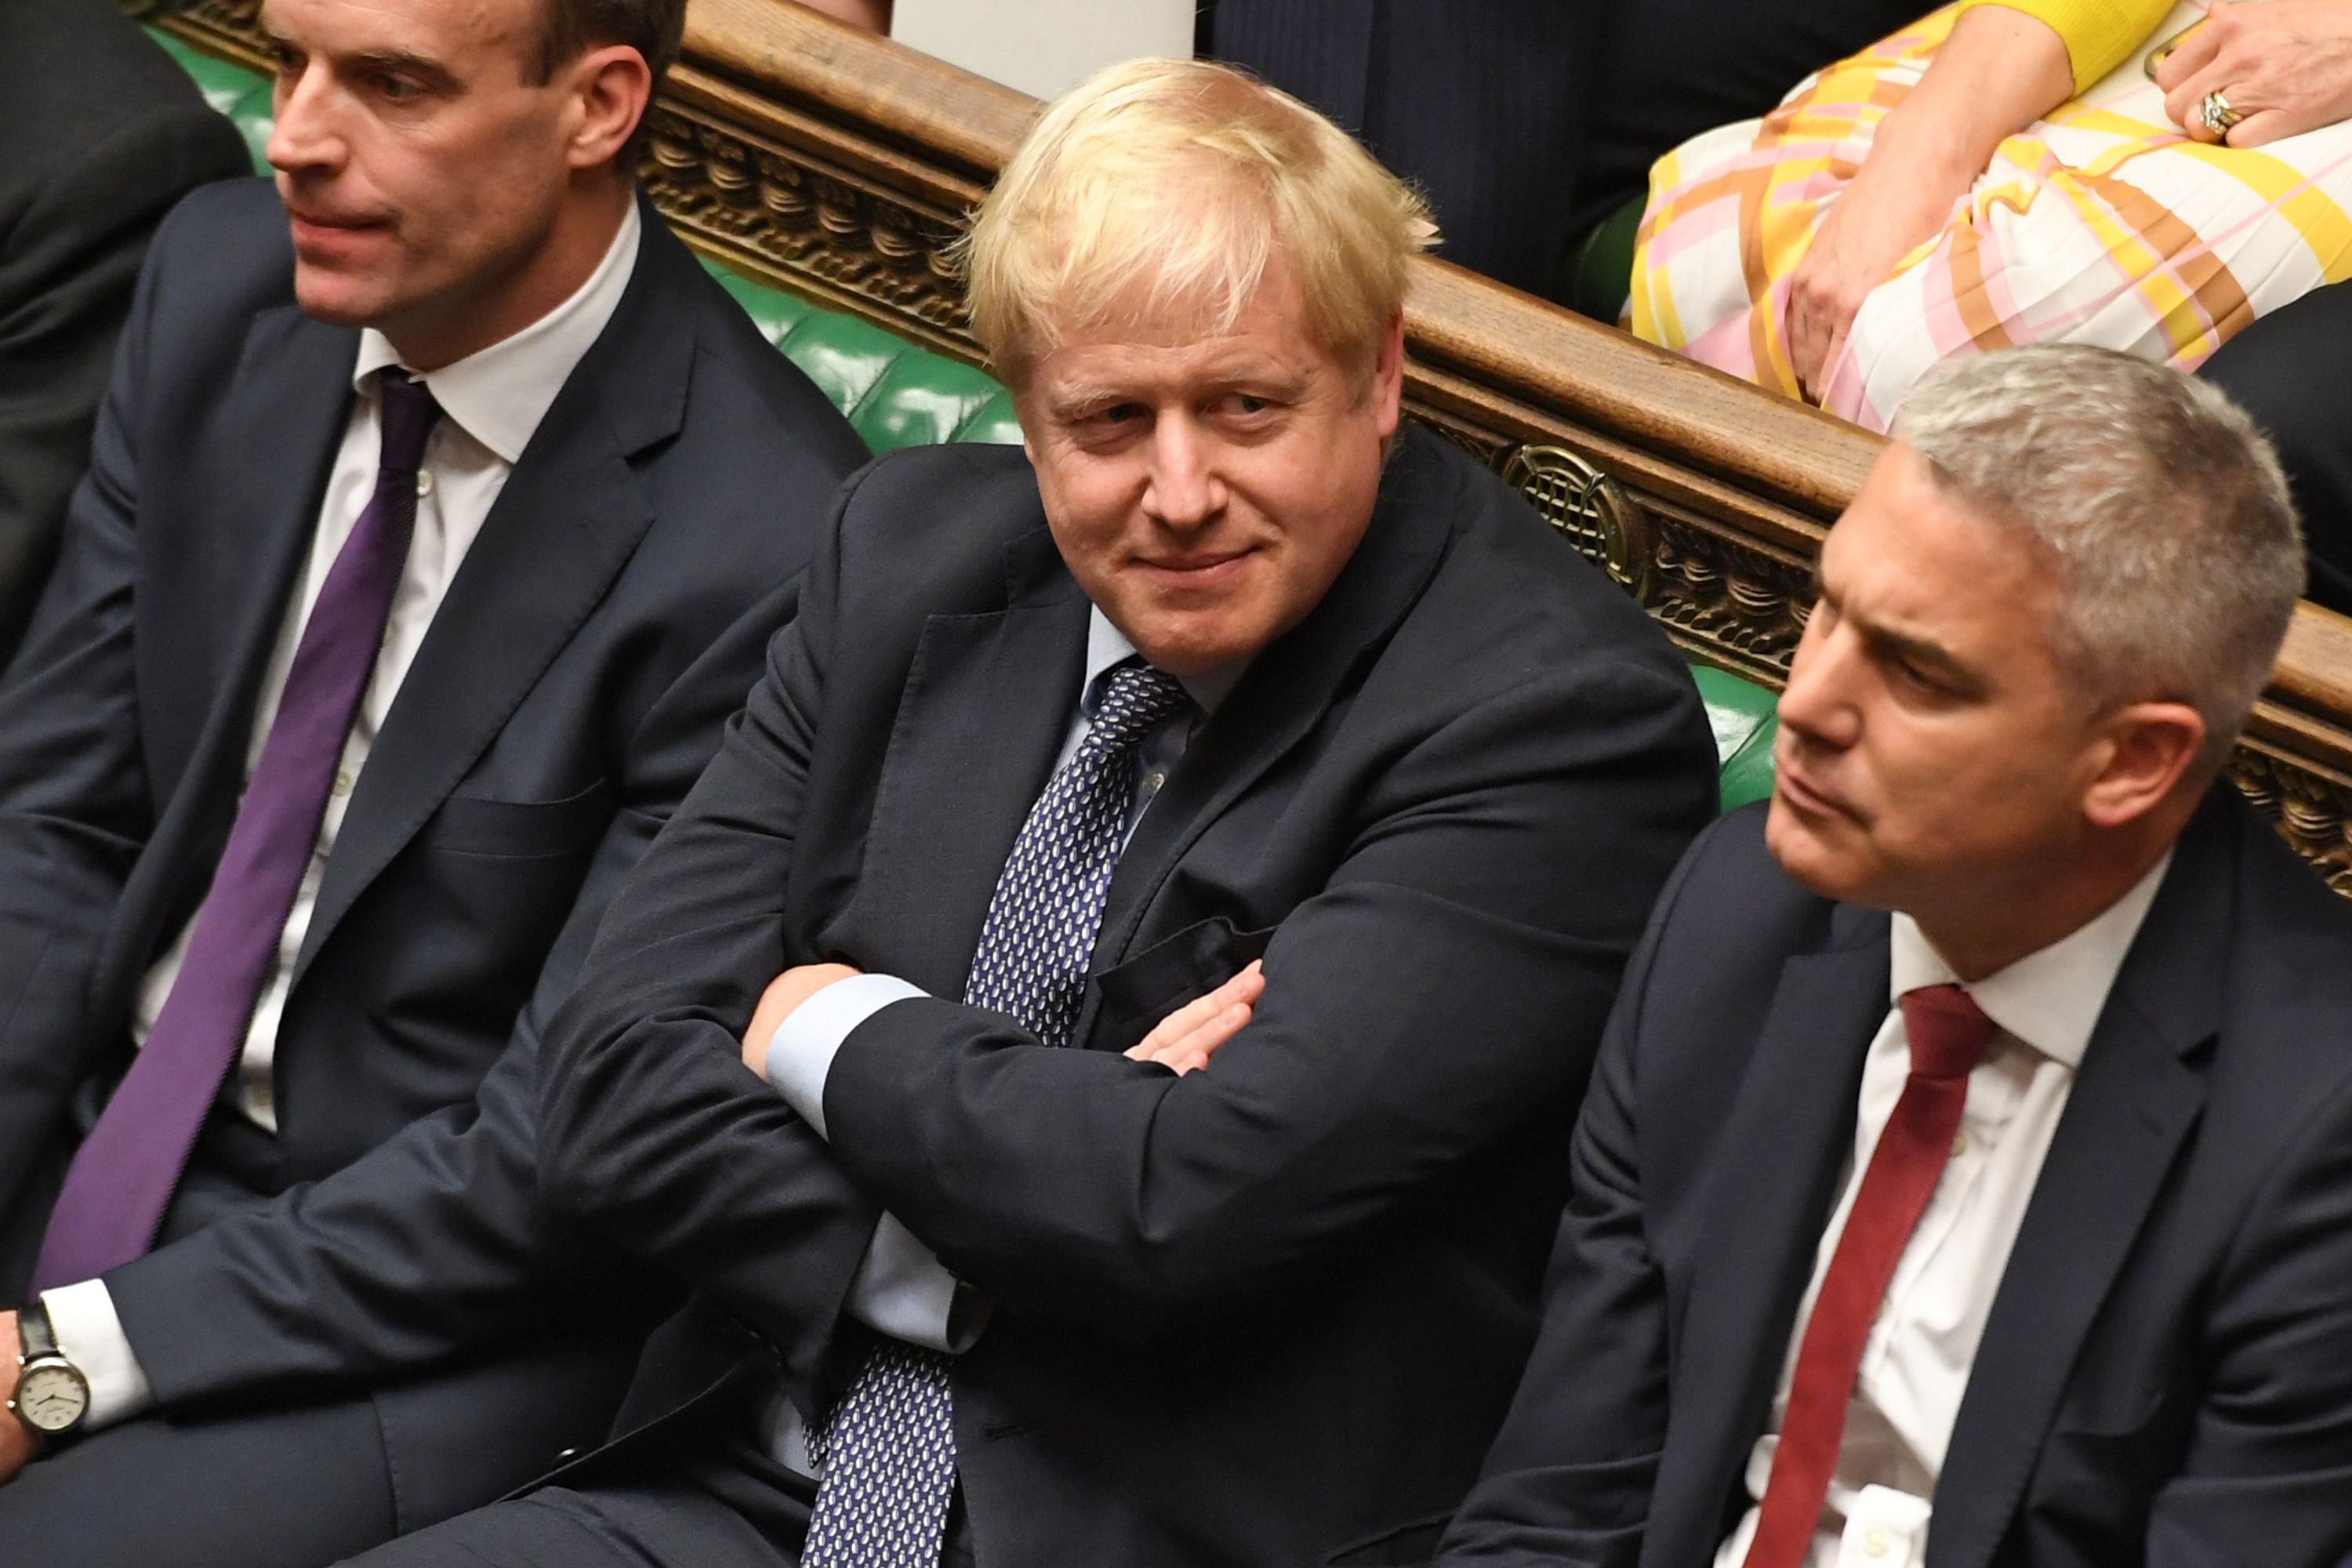 Britain’s Prime Minister Boris Johnson smiling in the House of Commons in London. Photo: Handout via AFP